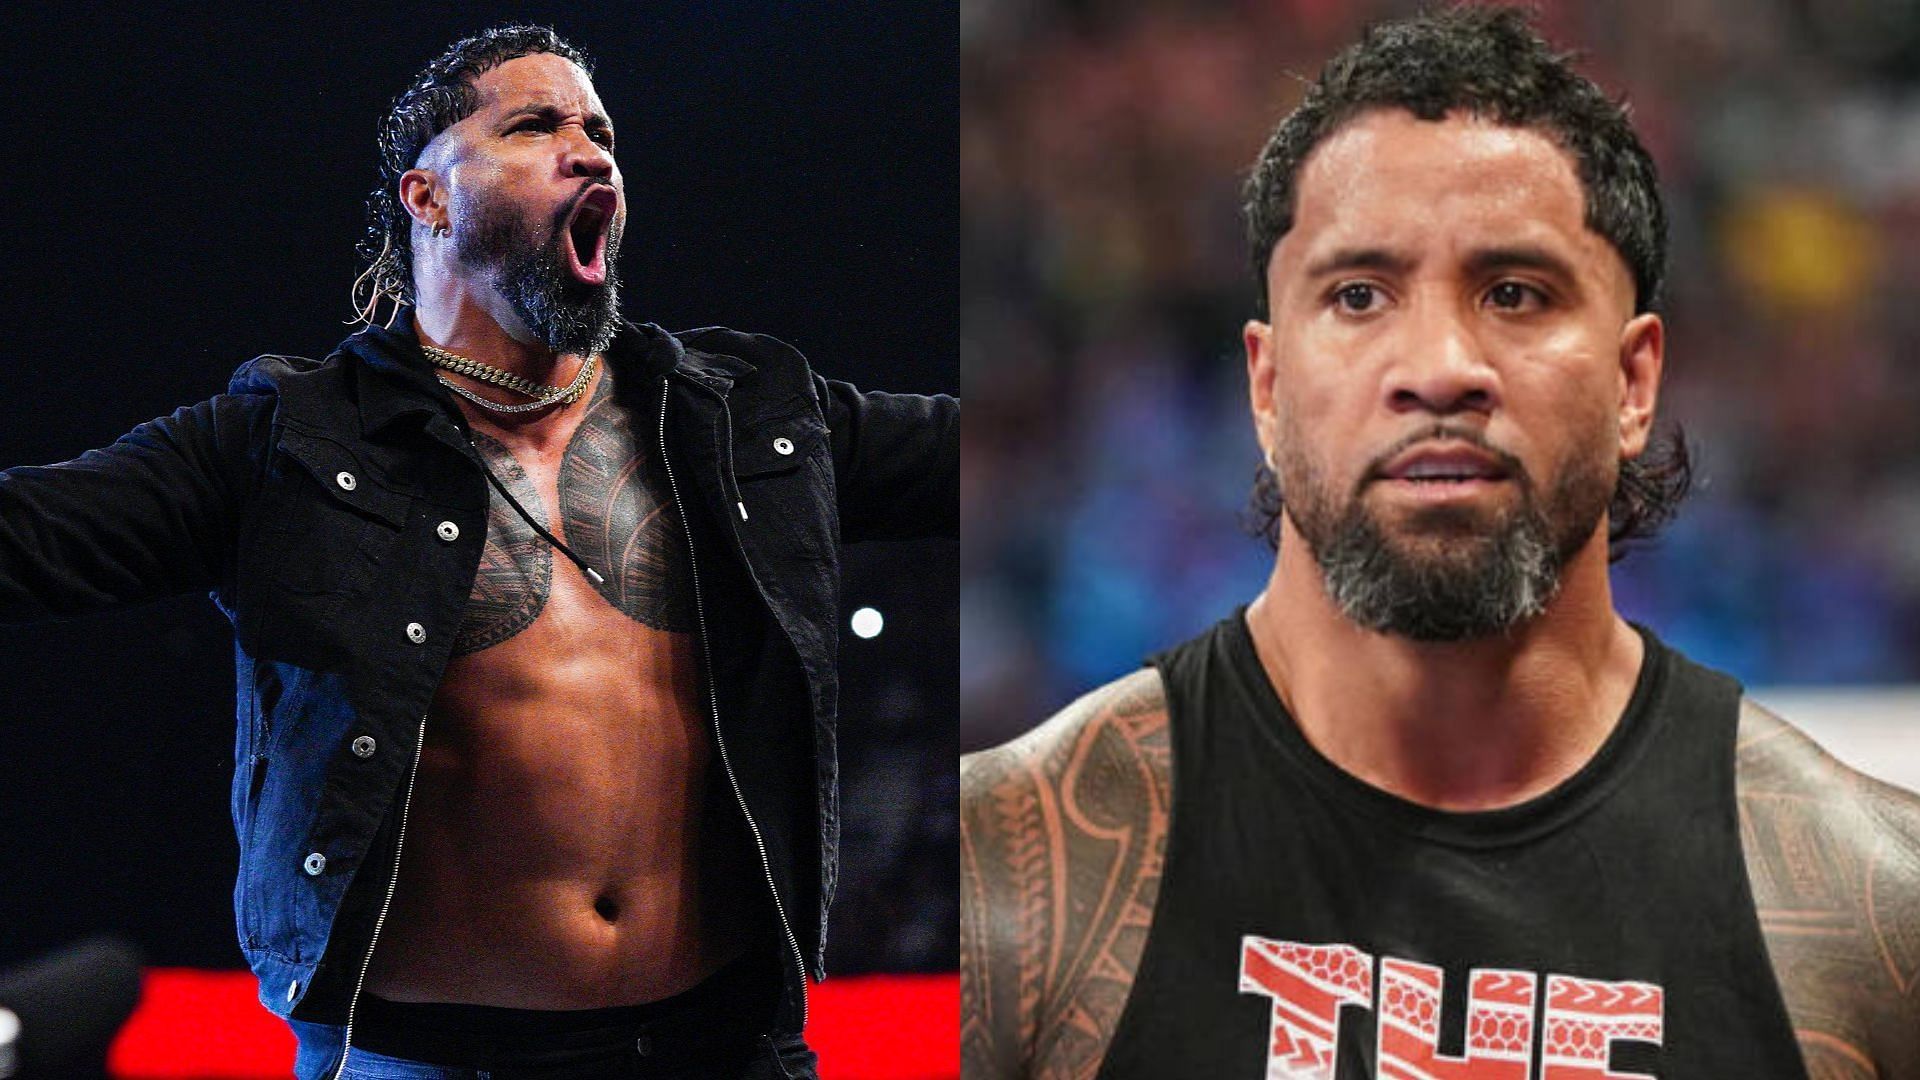 Jey Uso recently moved to Monday Night RAW